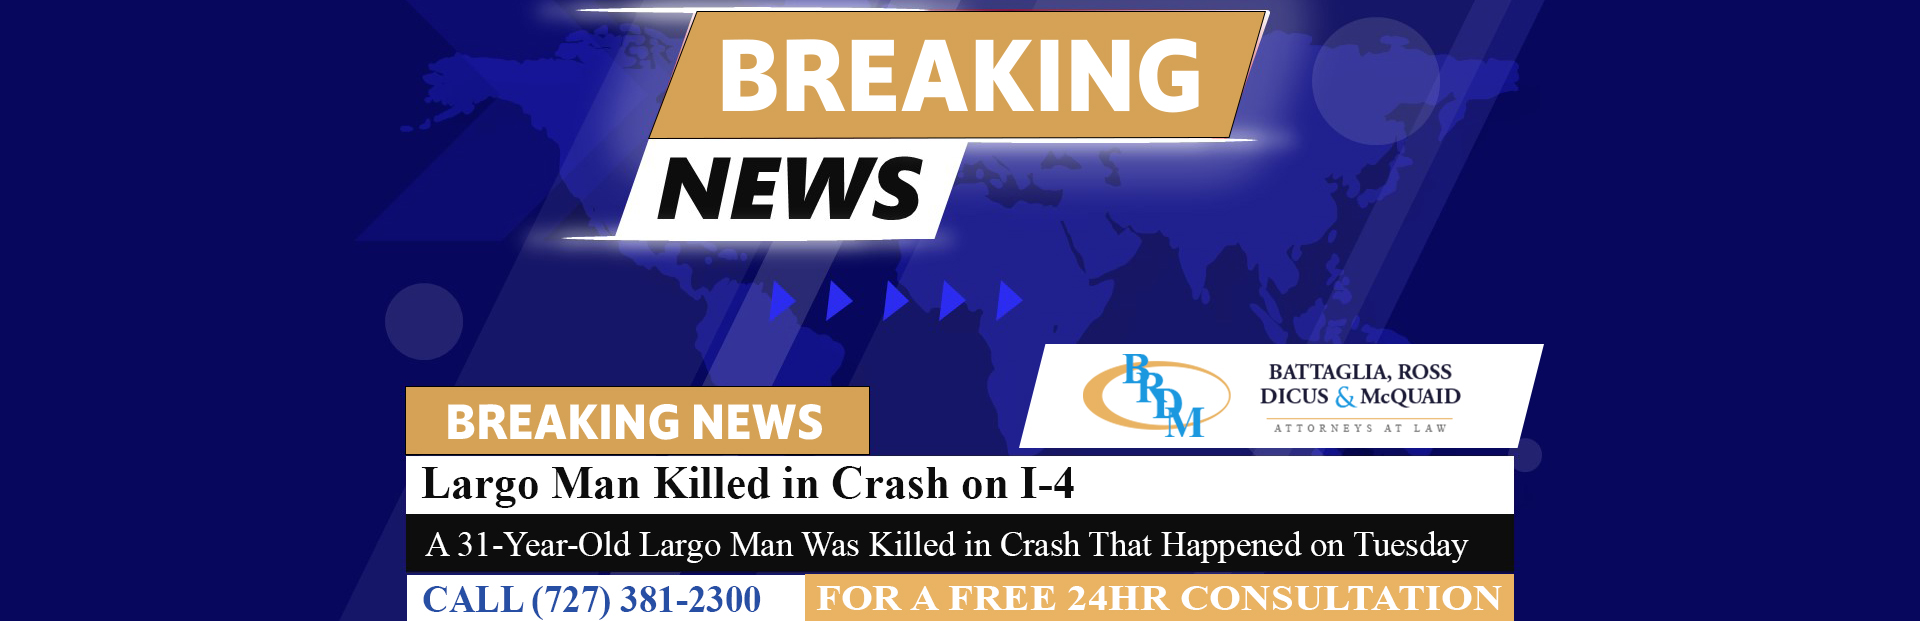 [11-03-22] Largo Man Killed in Crash When Tractor-Trailer Collides With Rear of Car on I-4